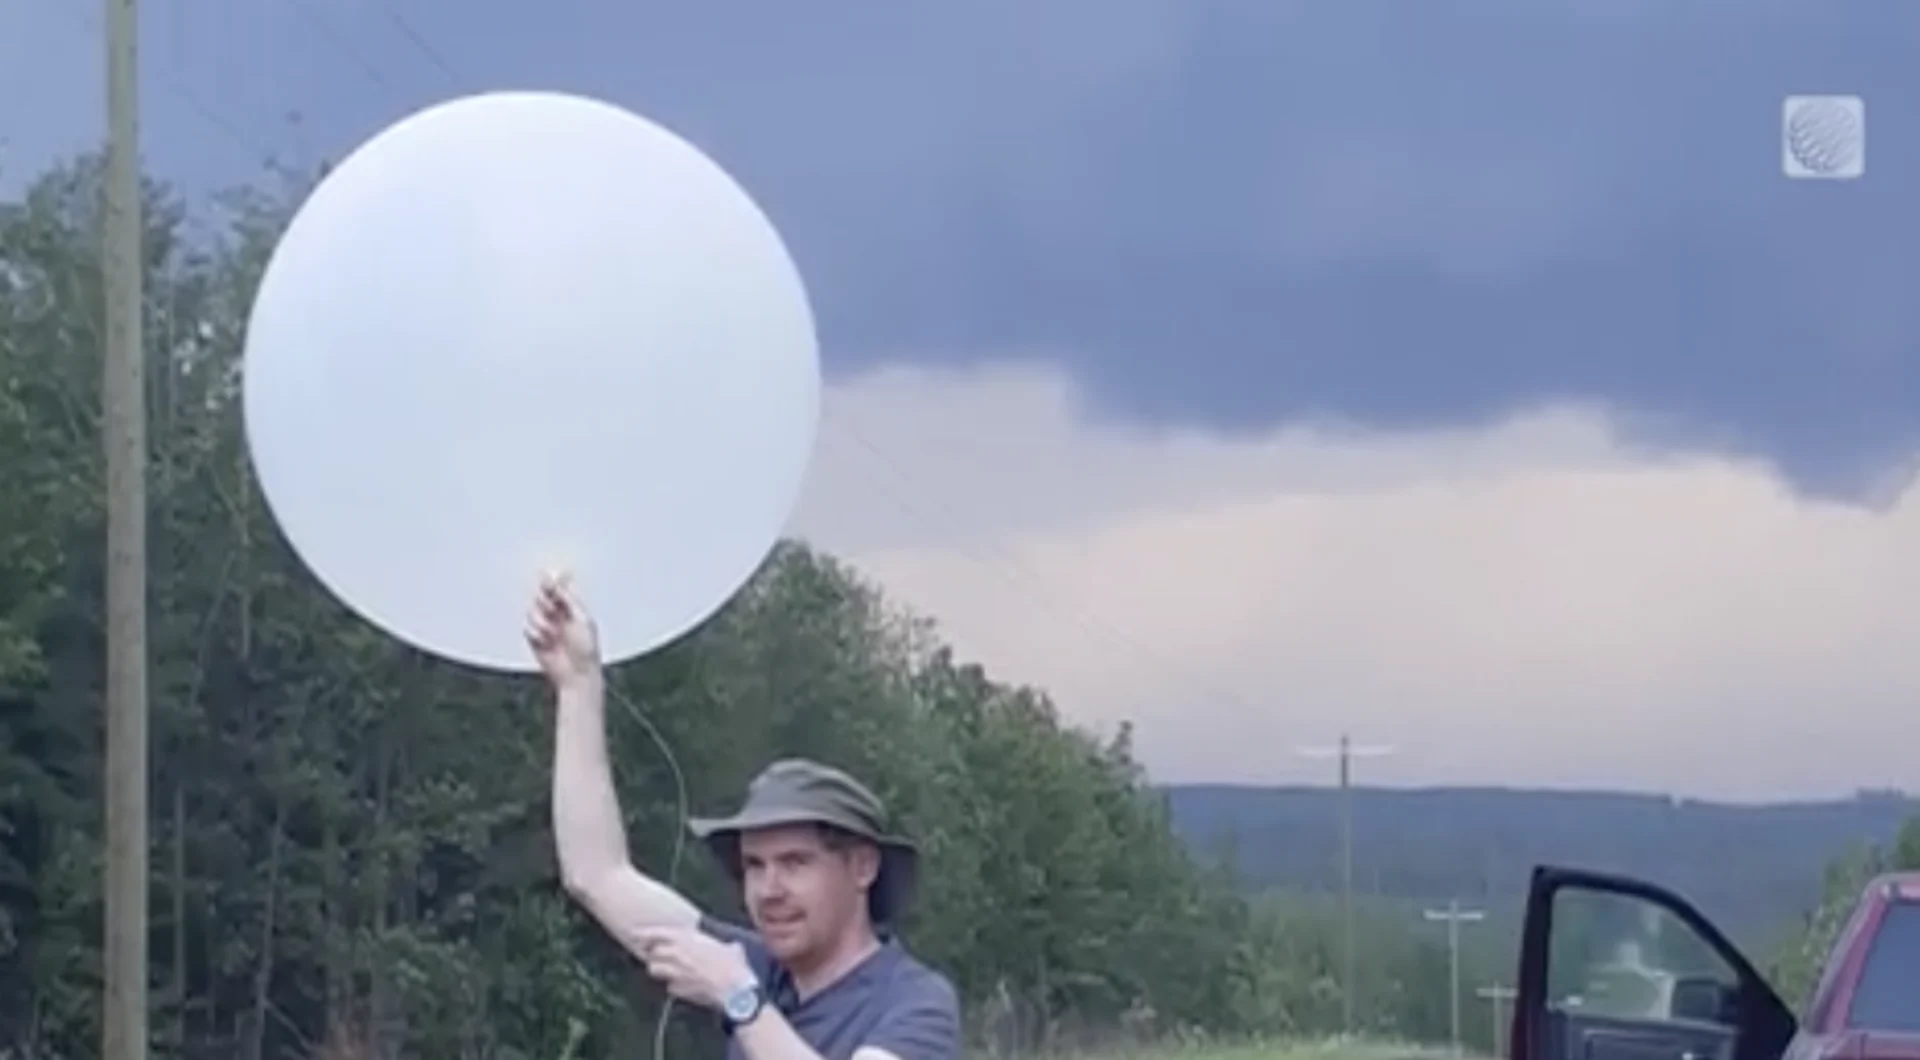 'Hailsonde' released into the eye of an Alberta storm in a world-first